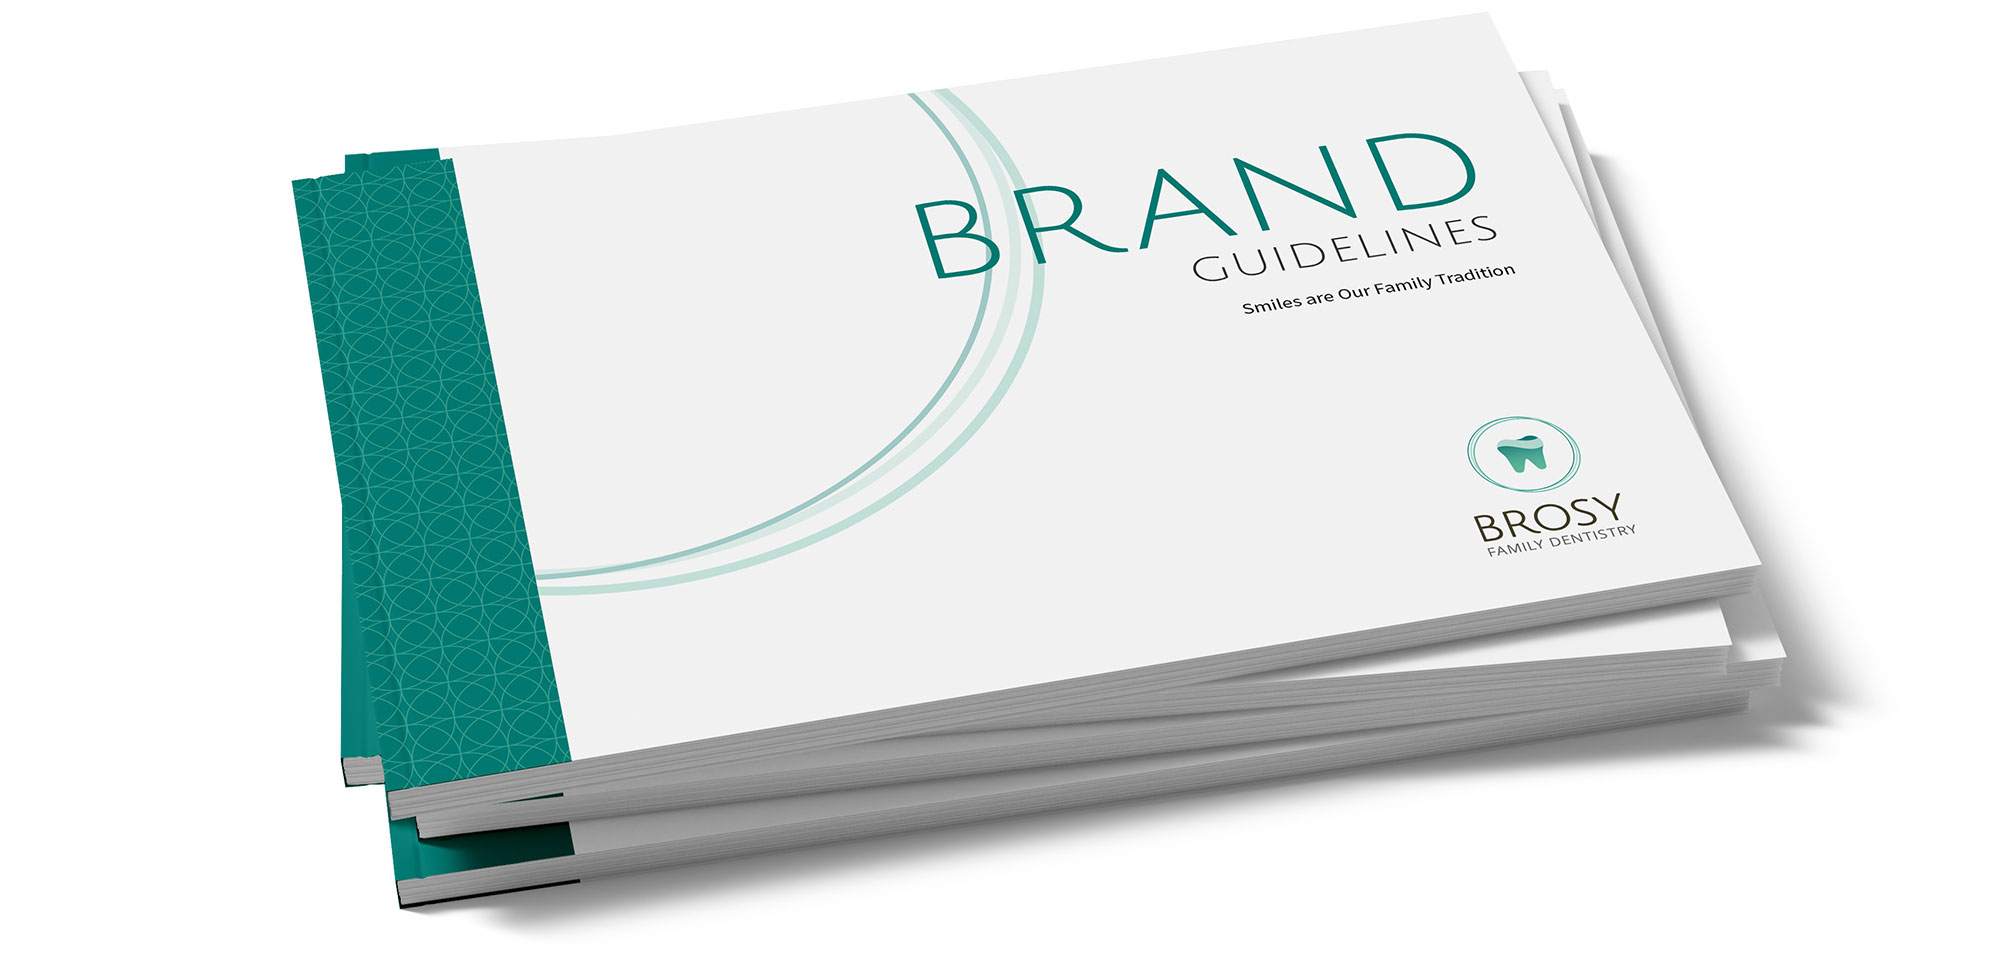 Brosy Brand Guidelines